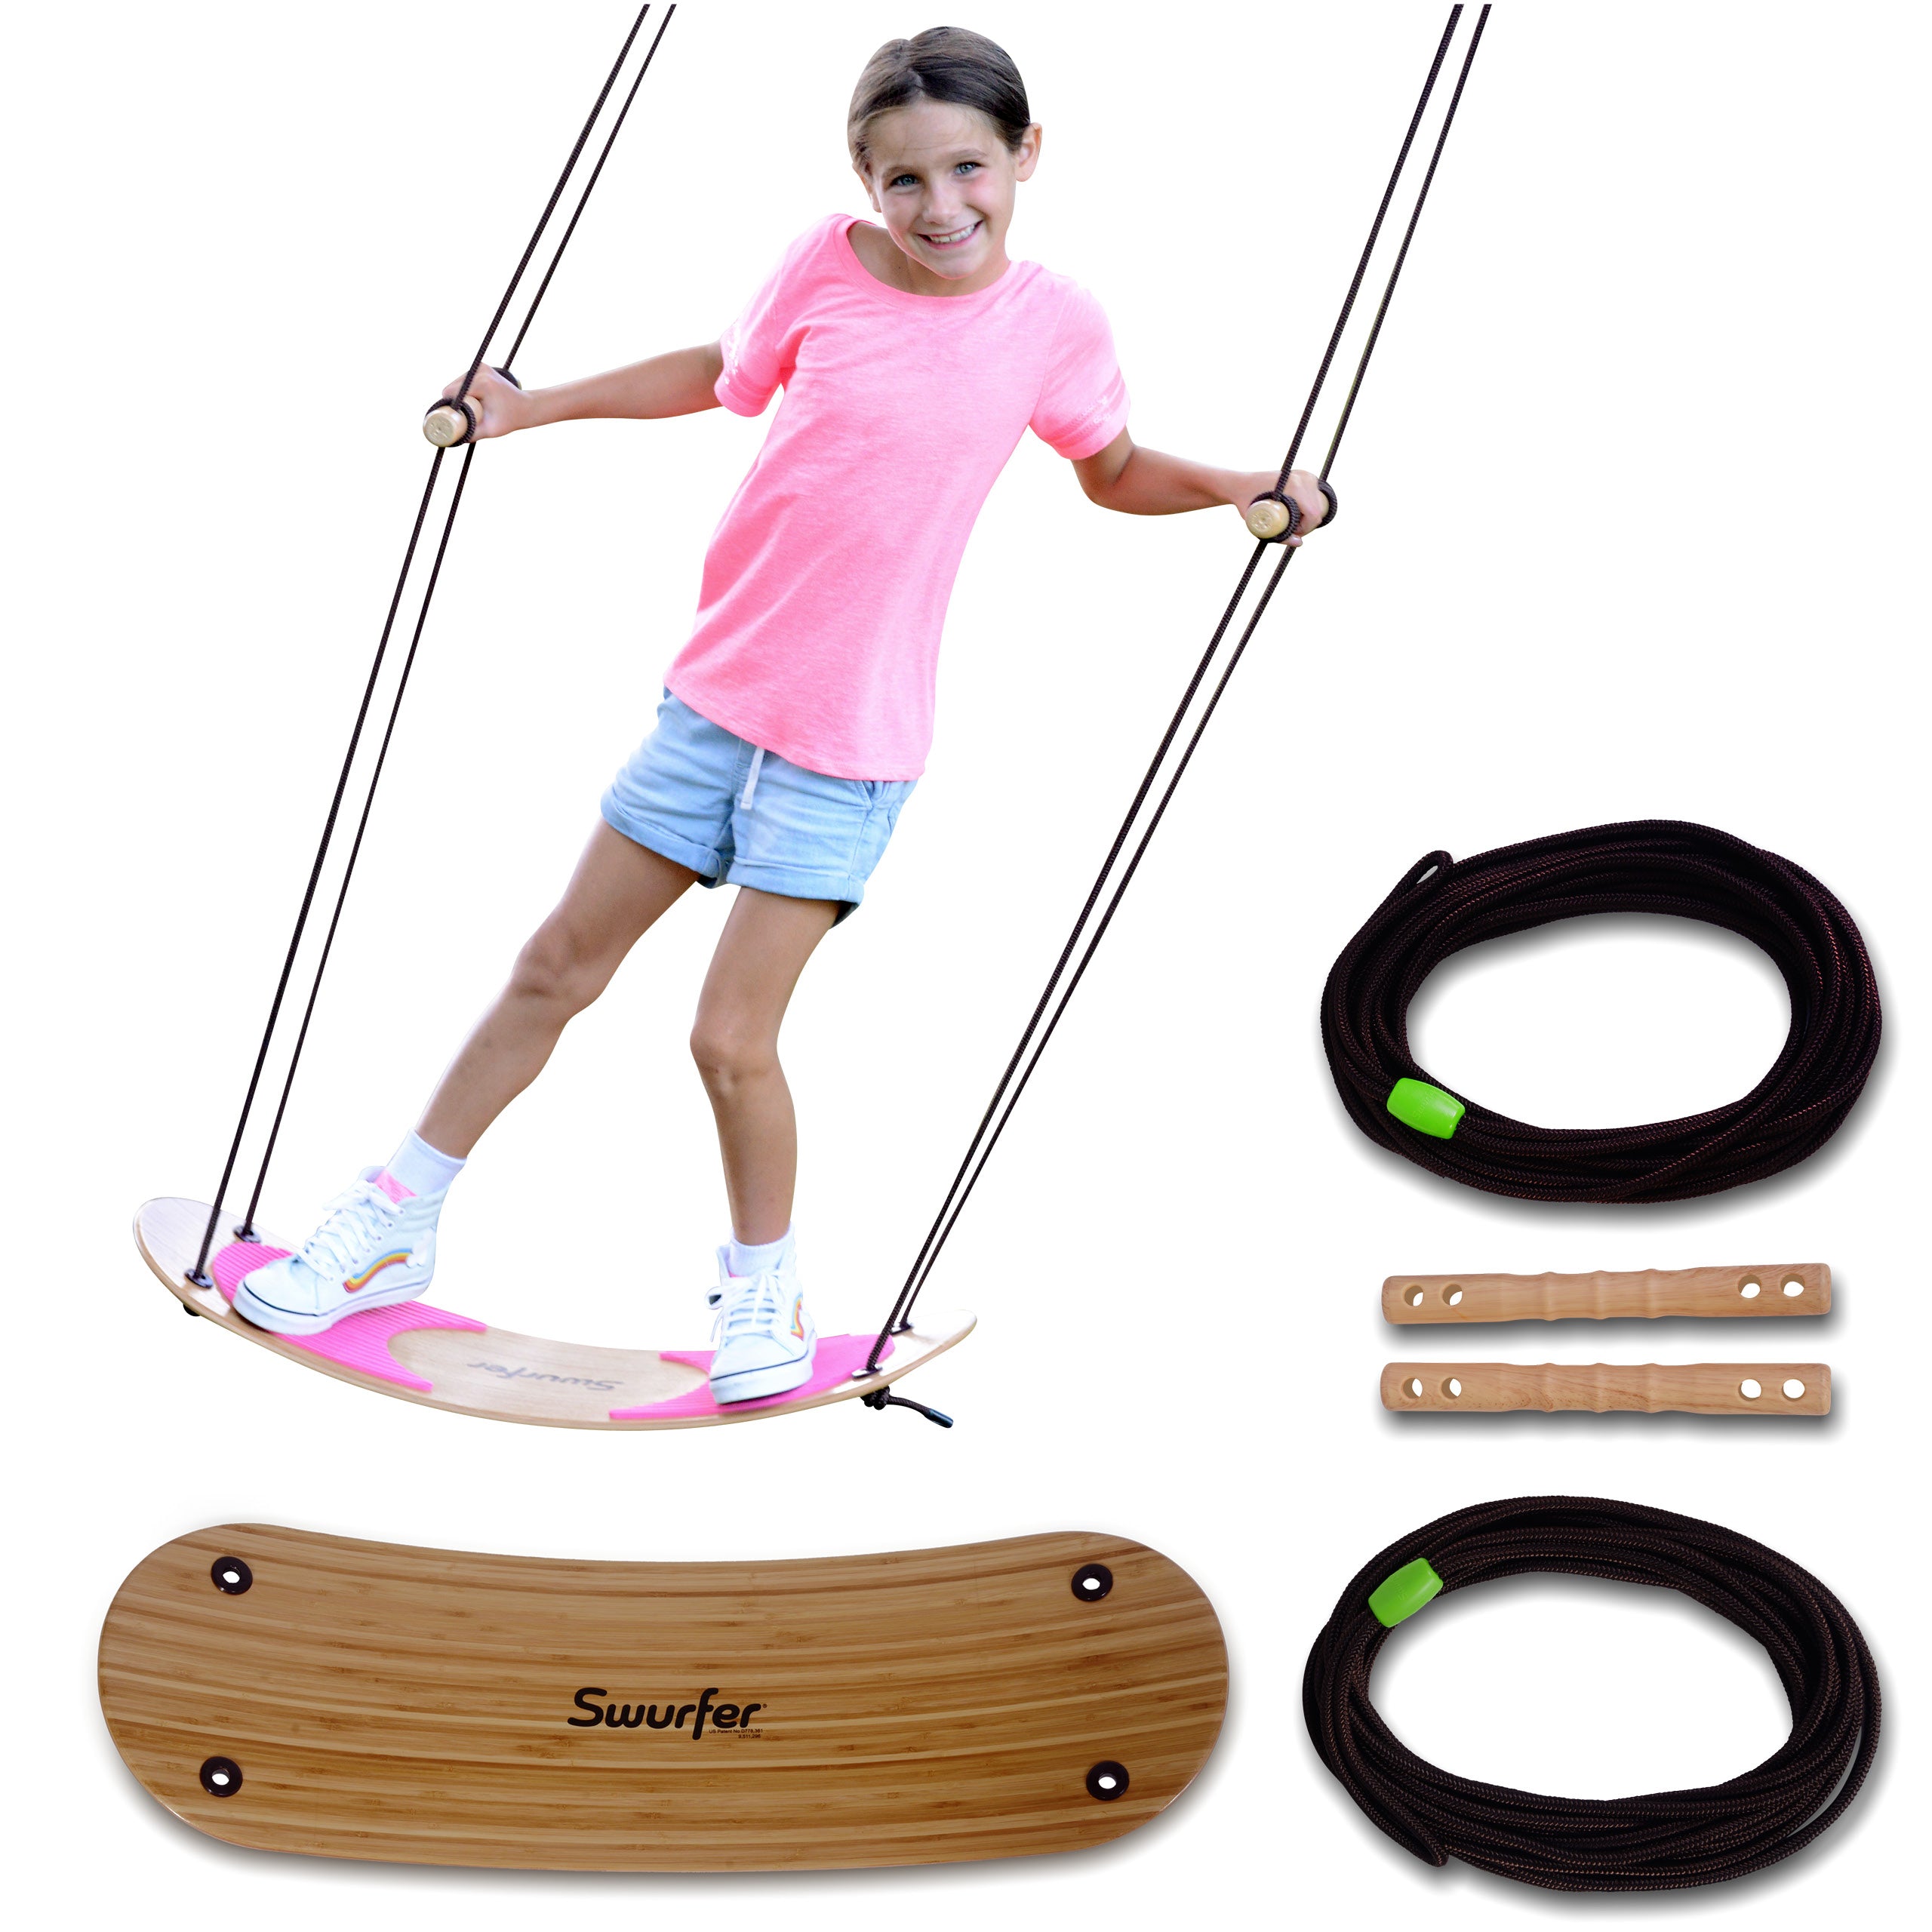 Swurfer Stand Up Surfing Tree Swing - Sustainable